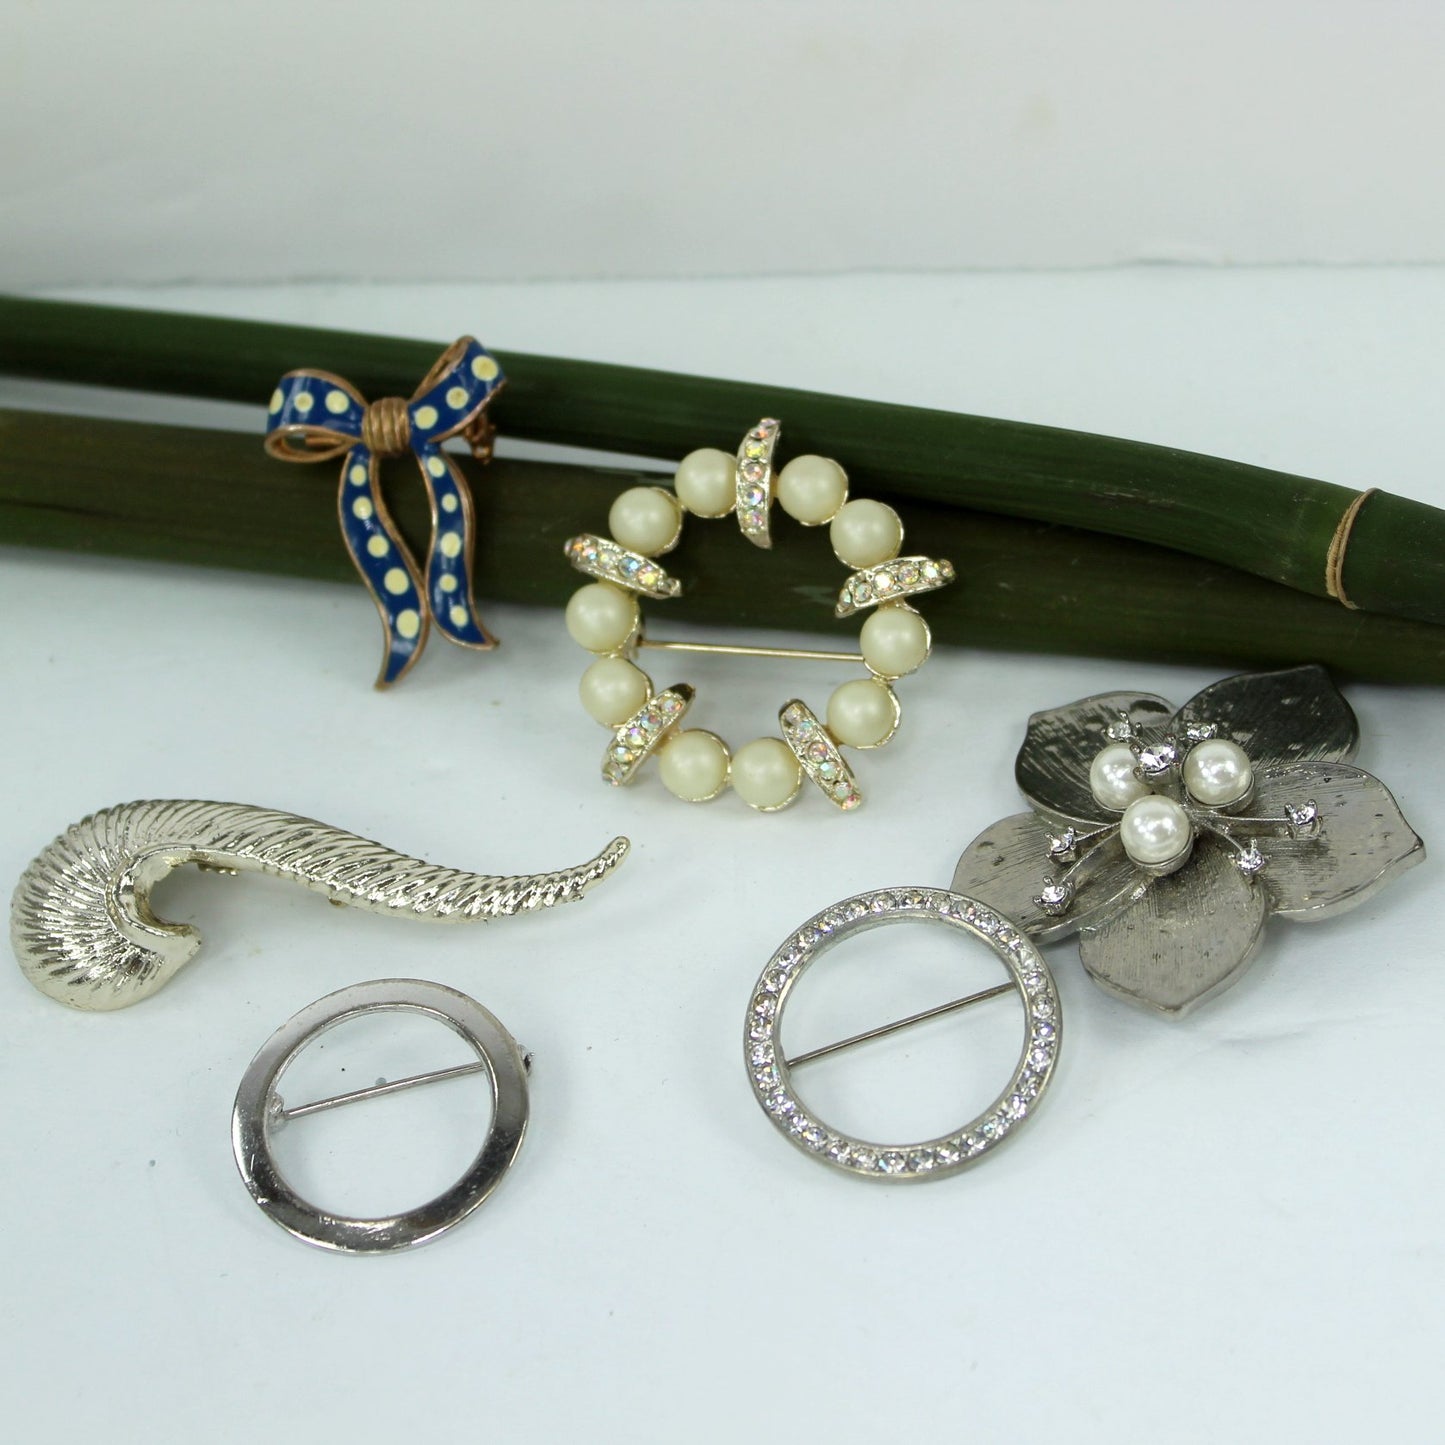 Collection Vintage Jewelry 2 Demi Parure 11 Pins Estate Wearables Bow Pearls RS polk dot bow silver leaves